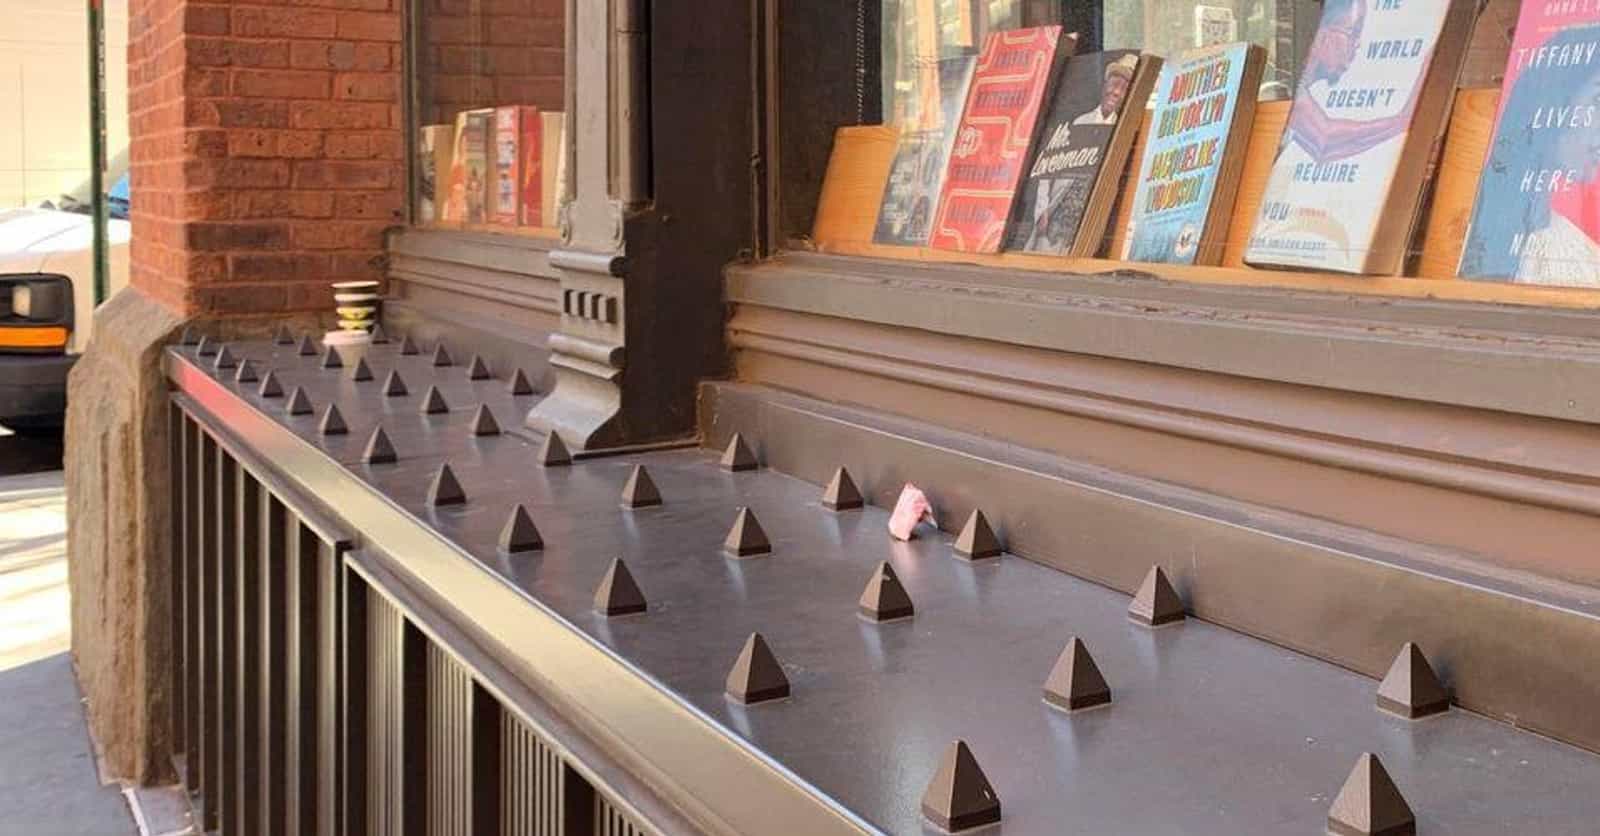 People Are Sharing All Of The Hostile Architecture They've Come Across